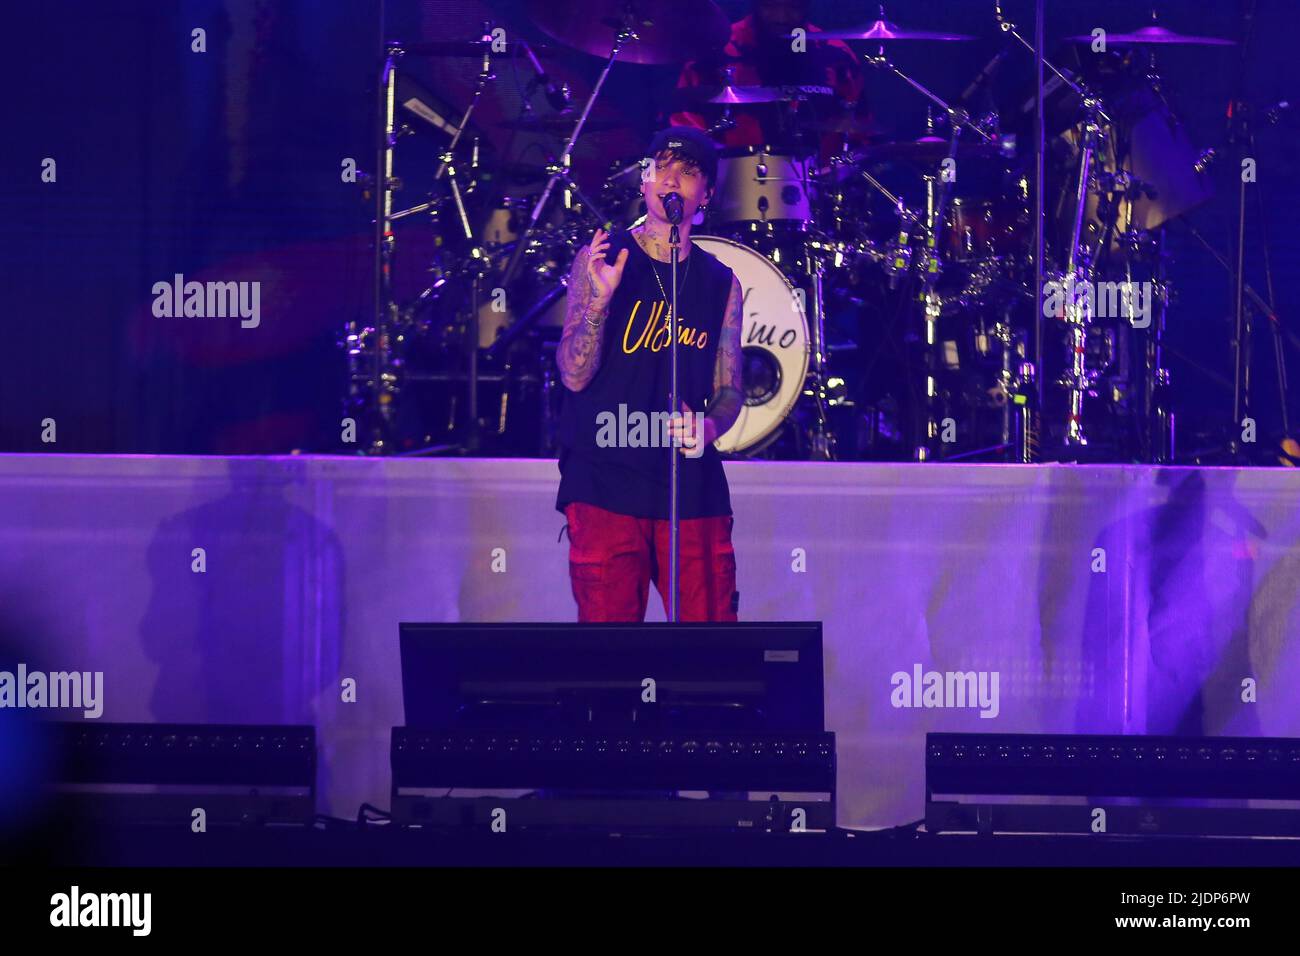 TURIN, ITALY - 22 JUNE 2022. Ultimo performing live on stage for his “Ultimo stadi 2022” tour on June 22, 2022 at Olympic Grande Torino stadium. Credit: Massimiliano Ferraro/Medialys Images/Alamy Live News Credit: Medialys Images by Massimiliano Ferraro/Alamy Live News Stock Photo